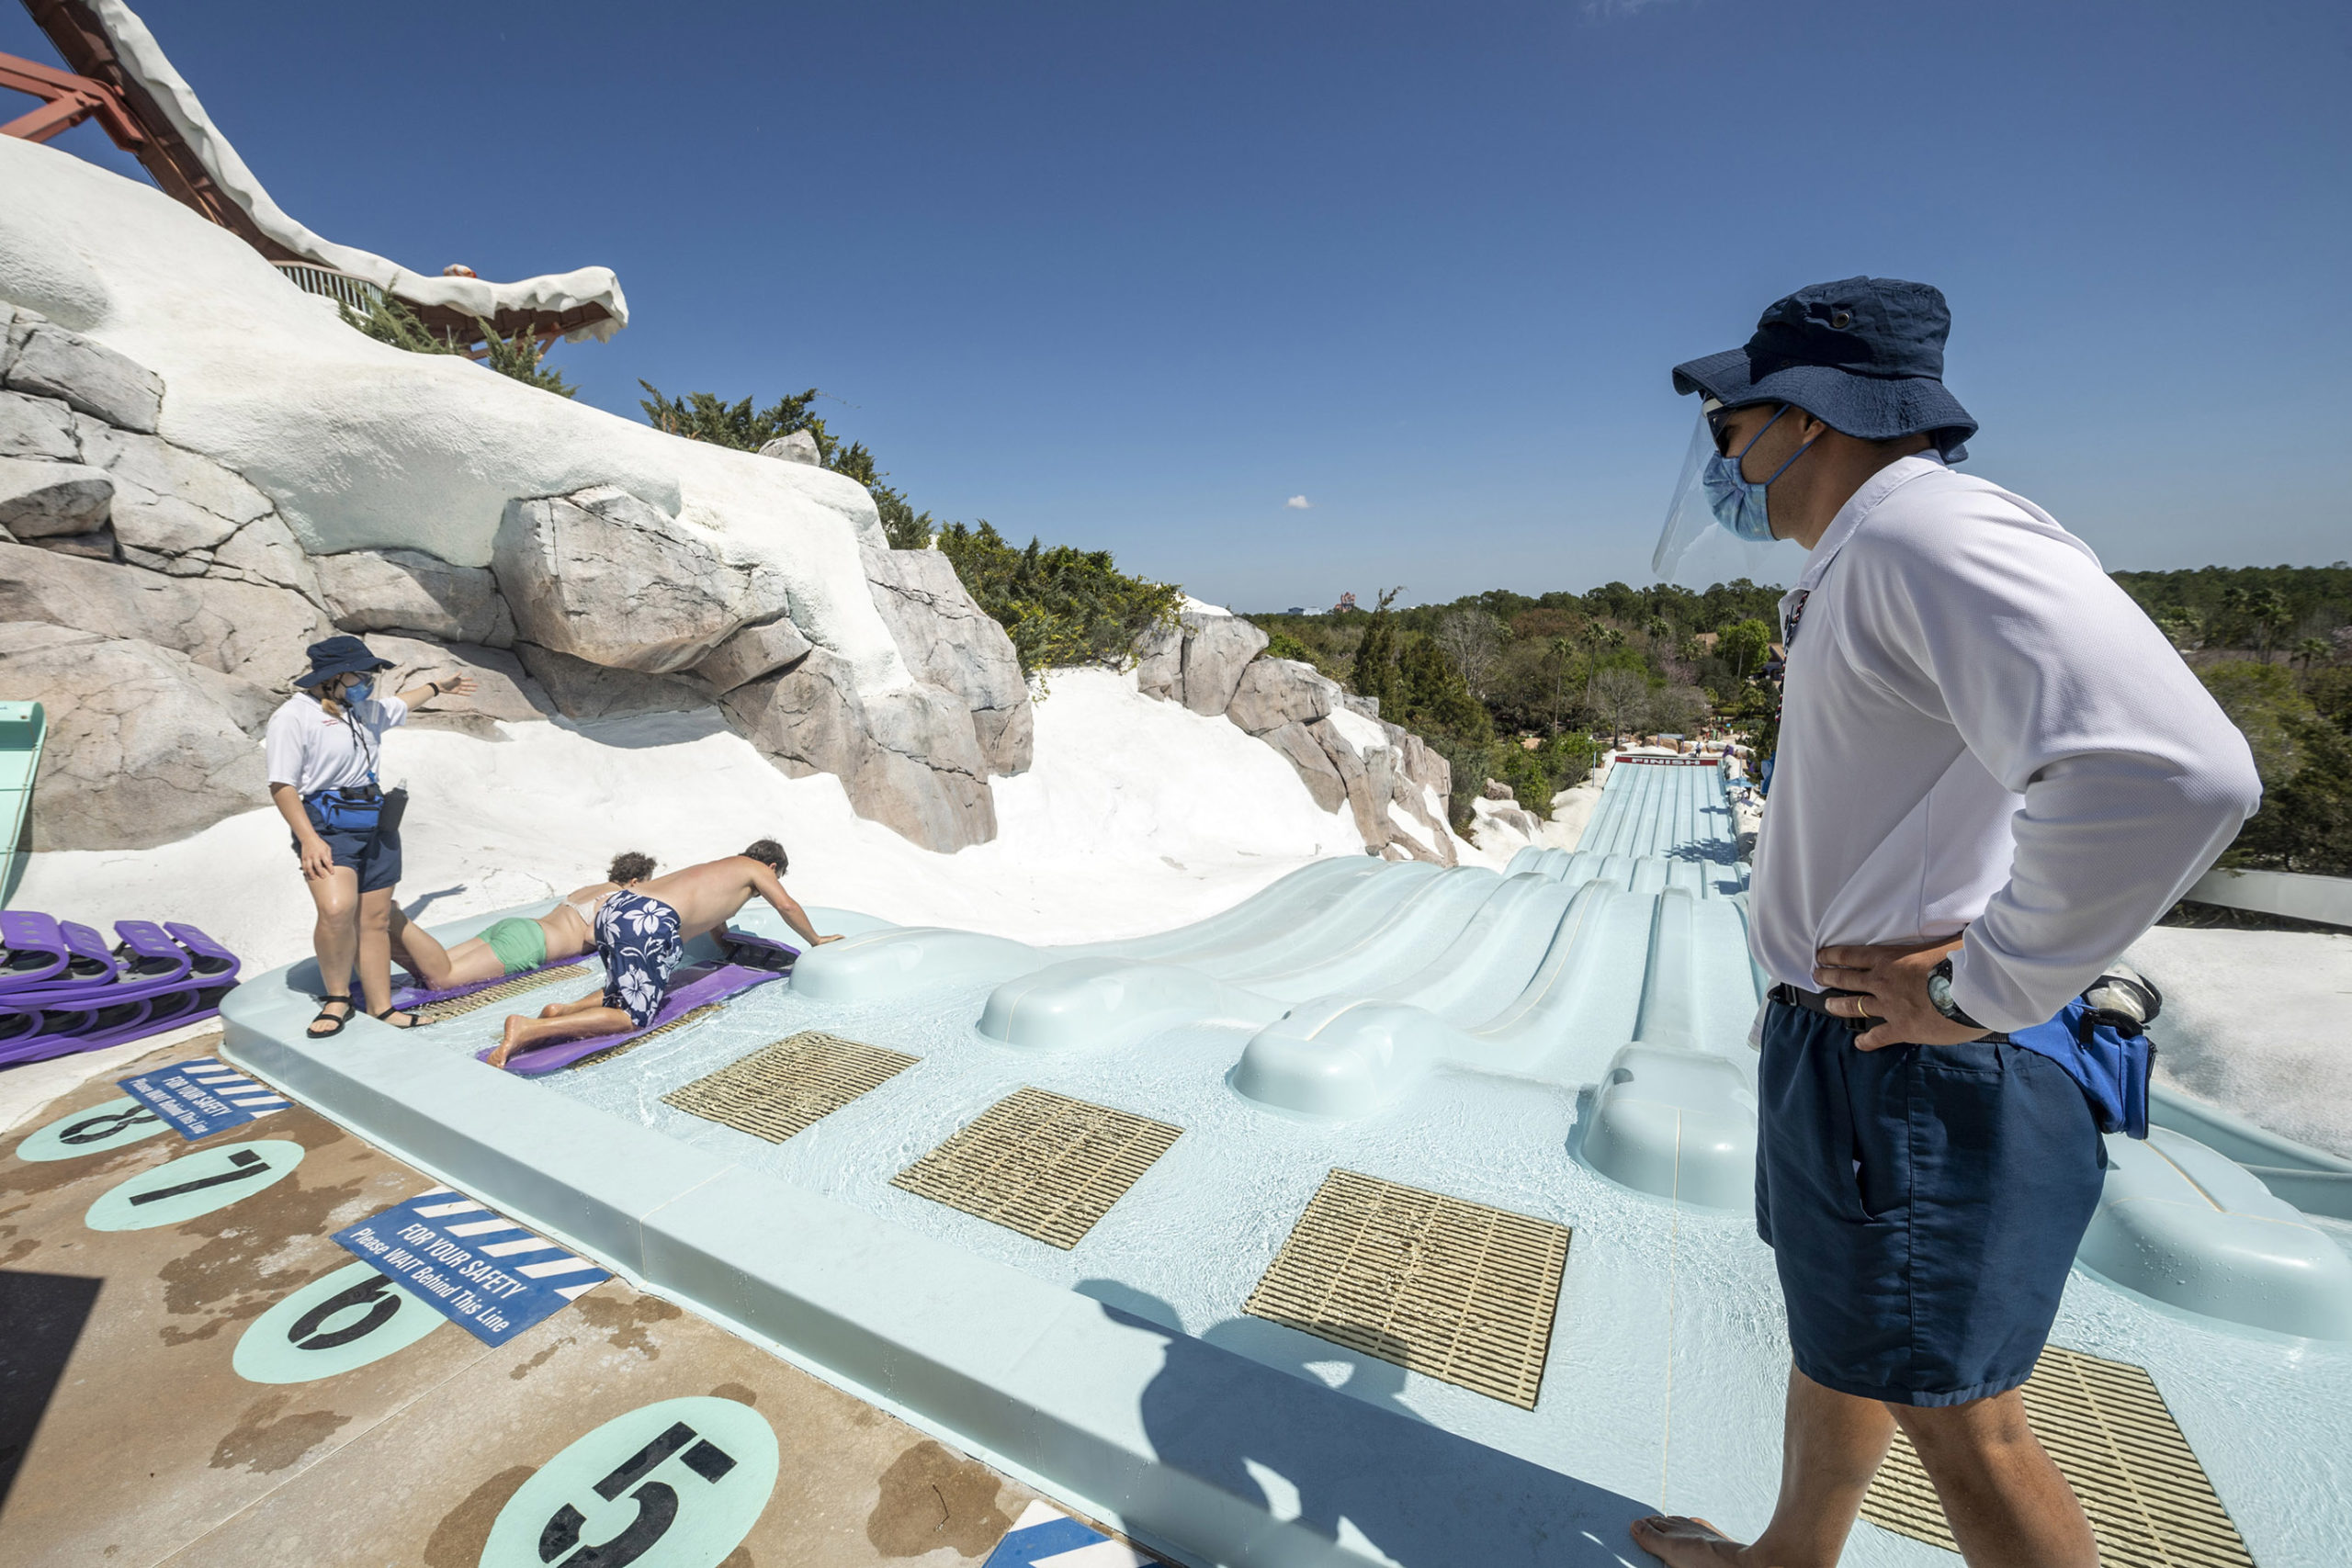 Disney's Blizzard Beach reopens after almost year long closure due to